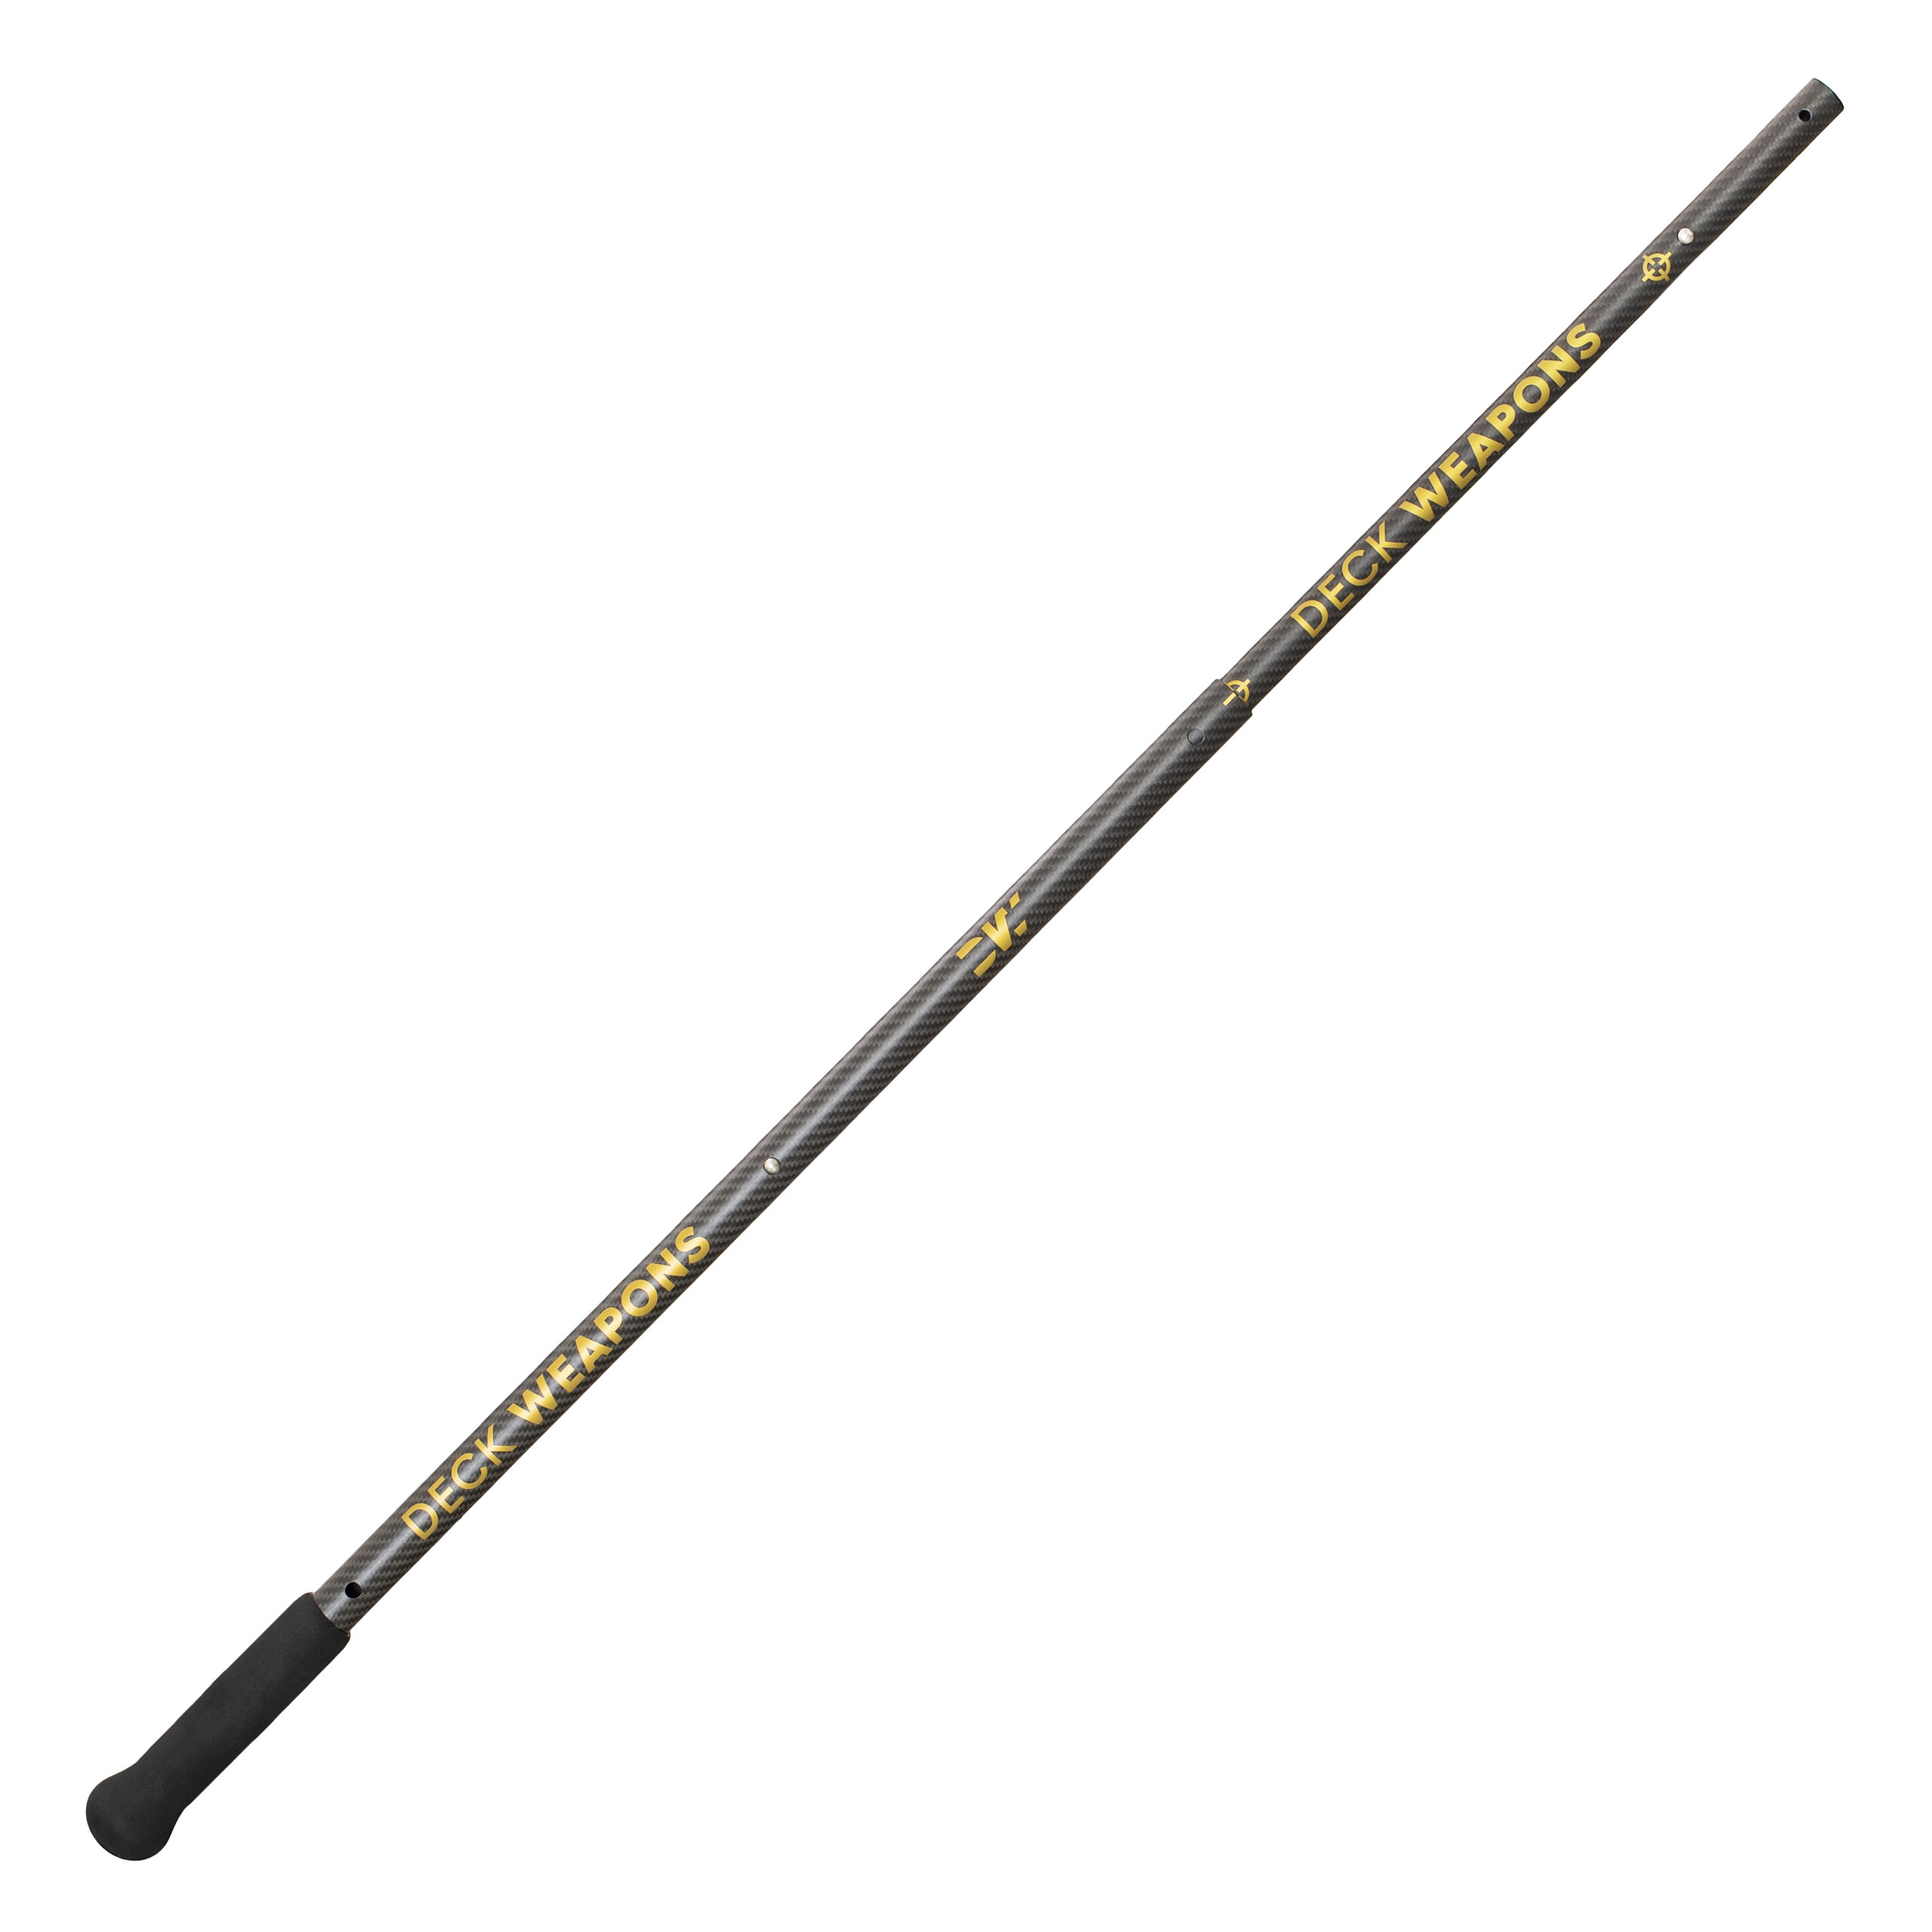 Telescopic Pole 3ft to 5ft (Pole-Arm) at Deckweapons